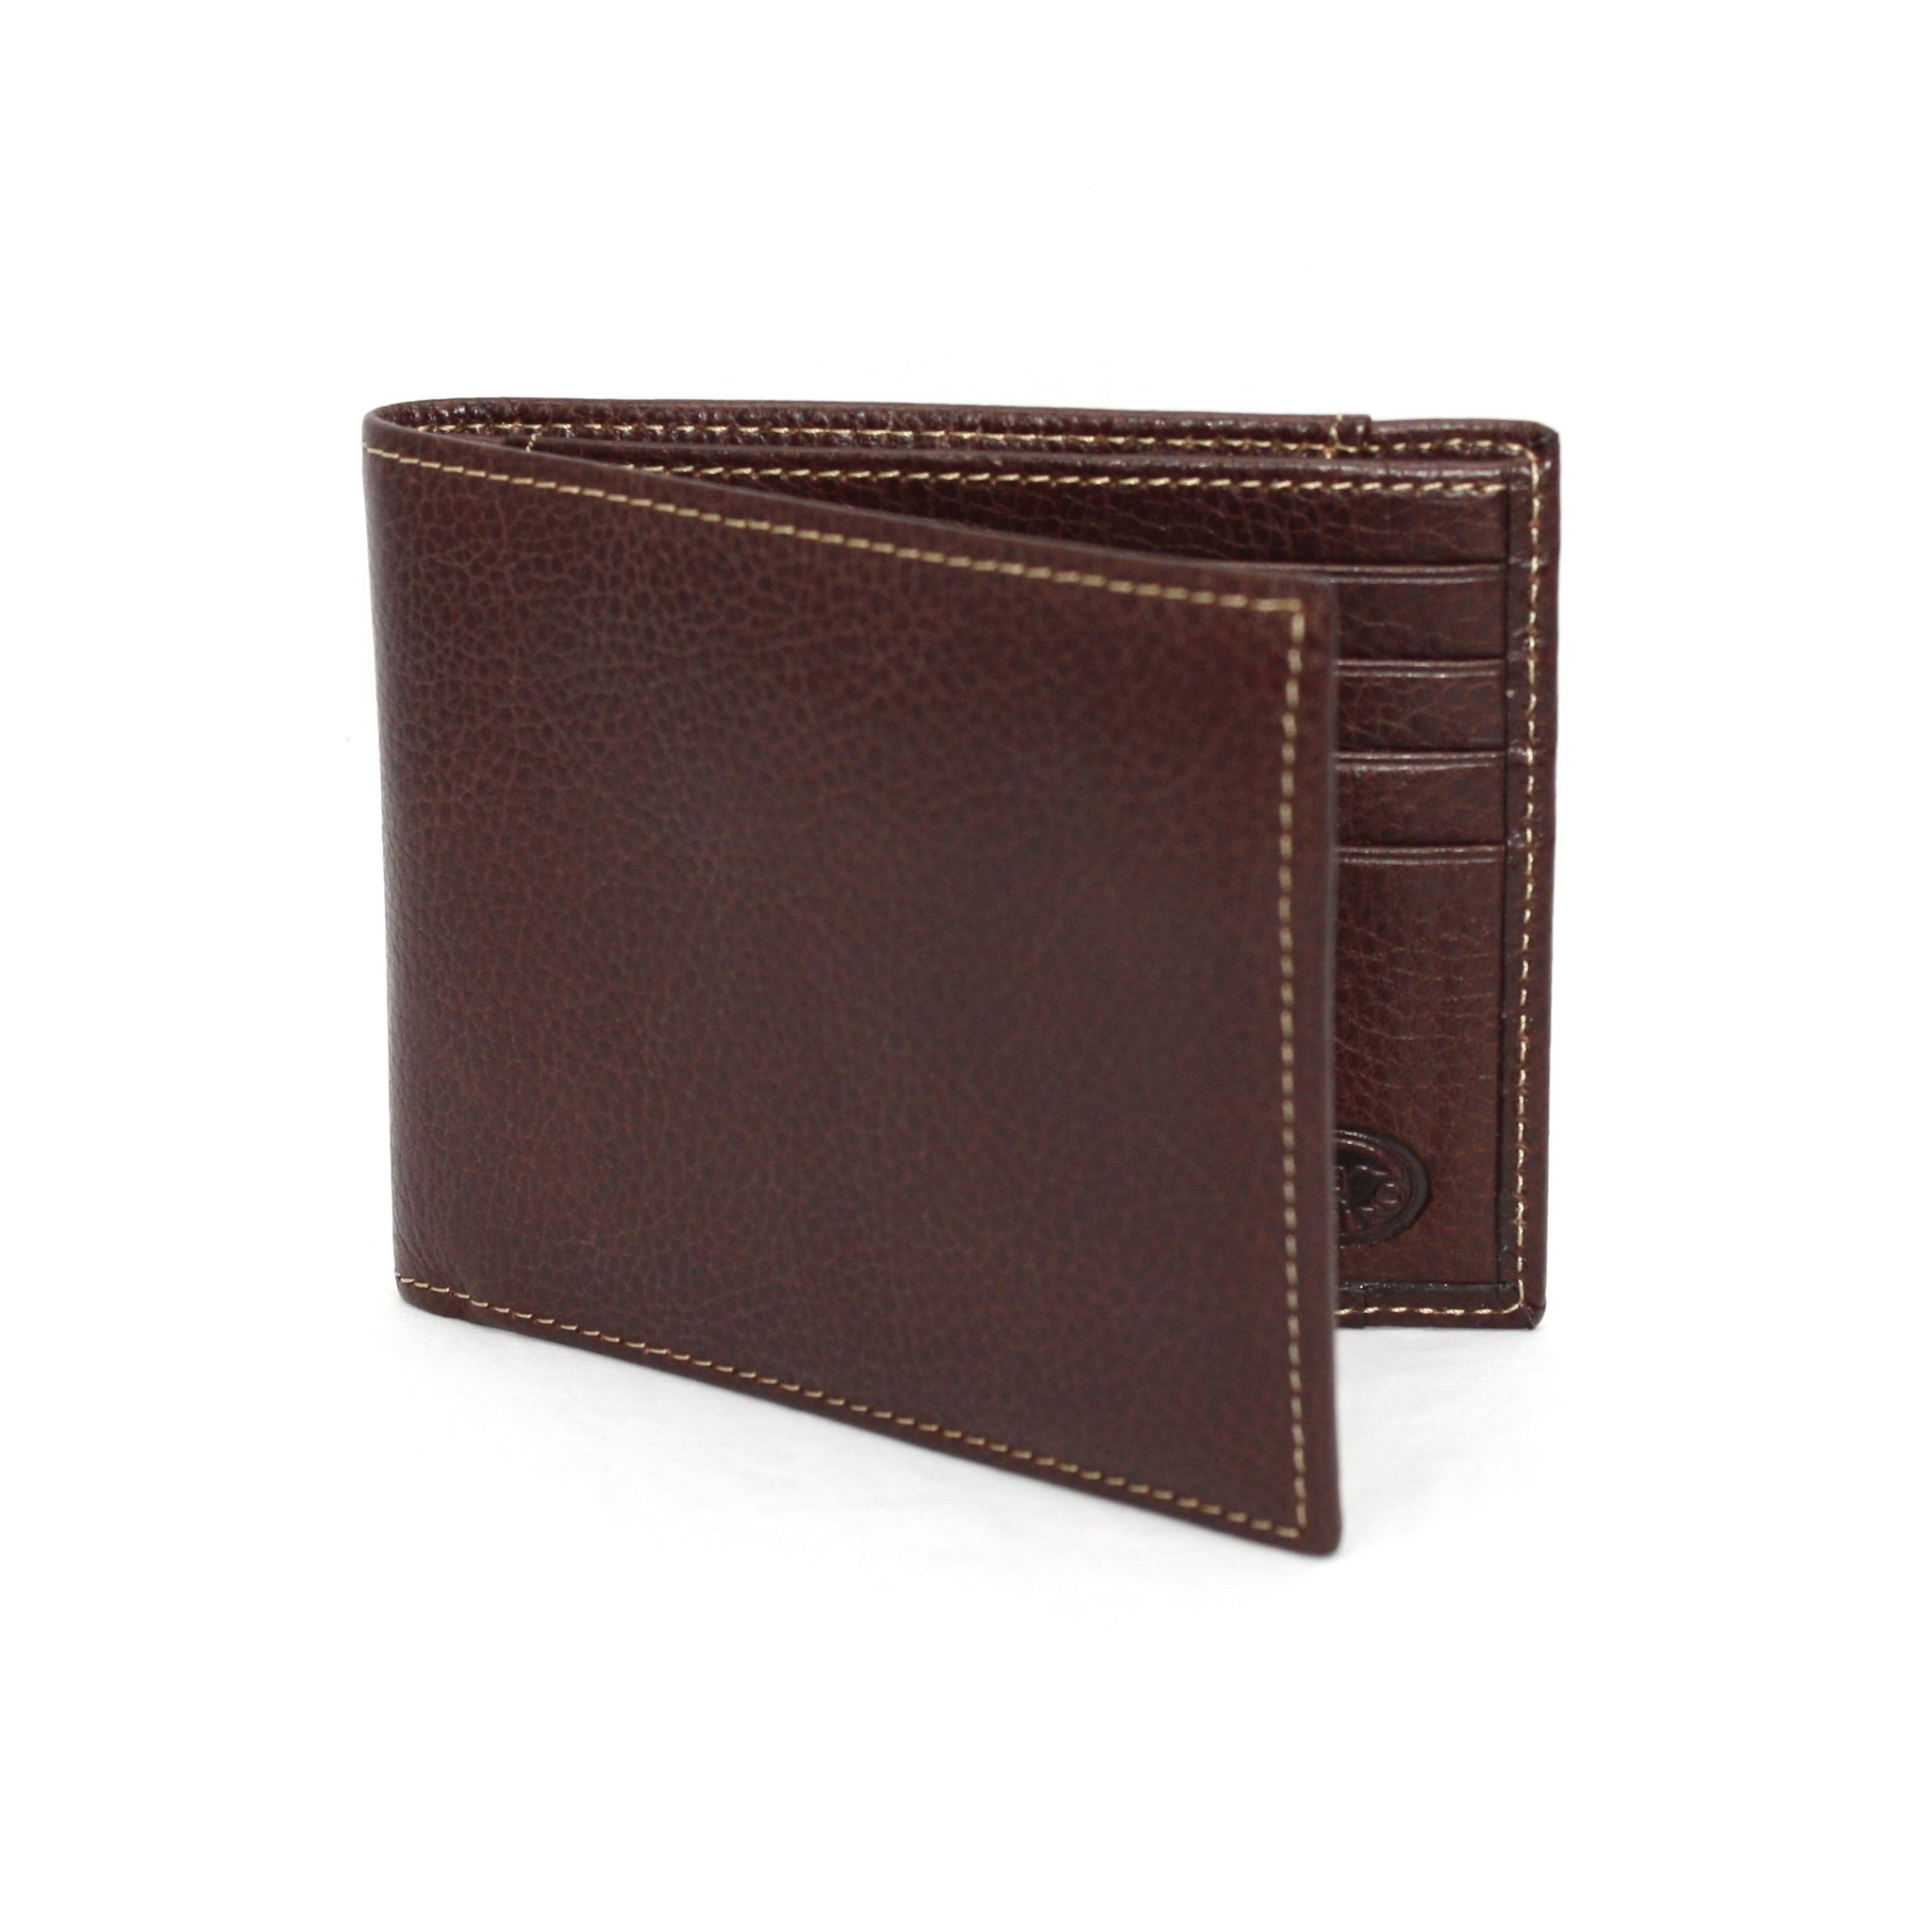 Tumbled Glove Leather Billfold Wallet - Brown